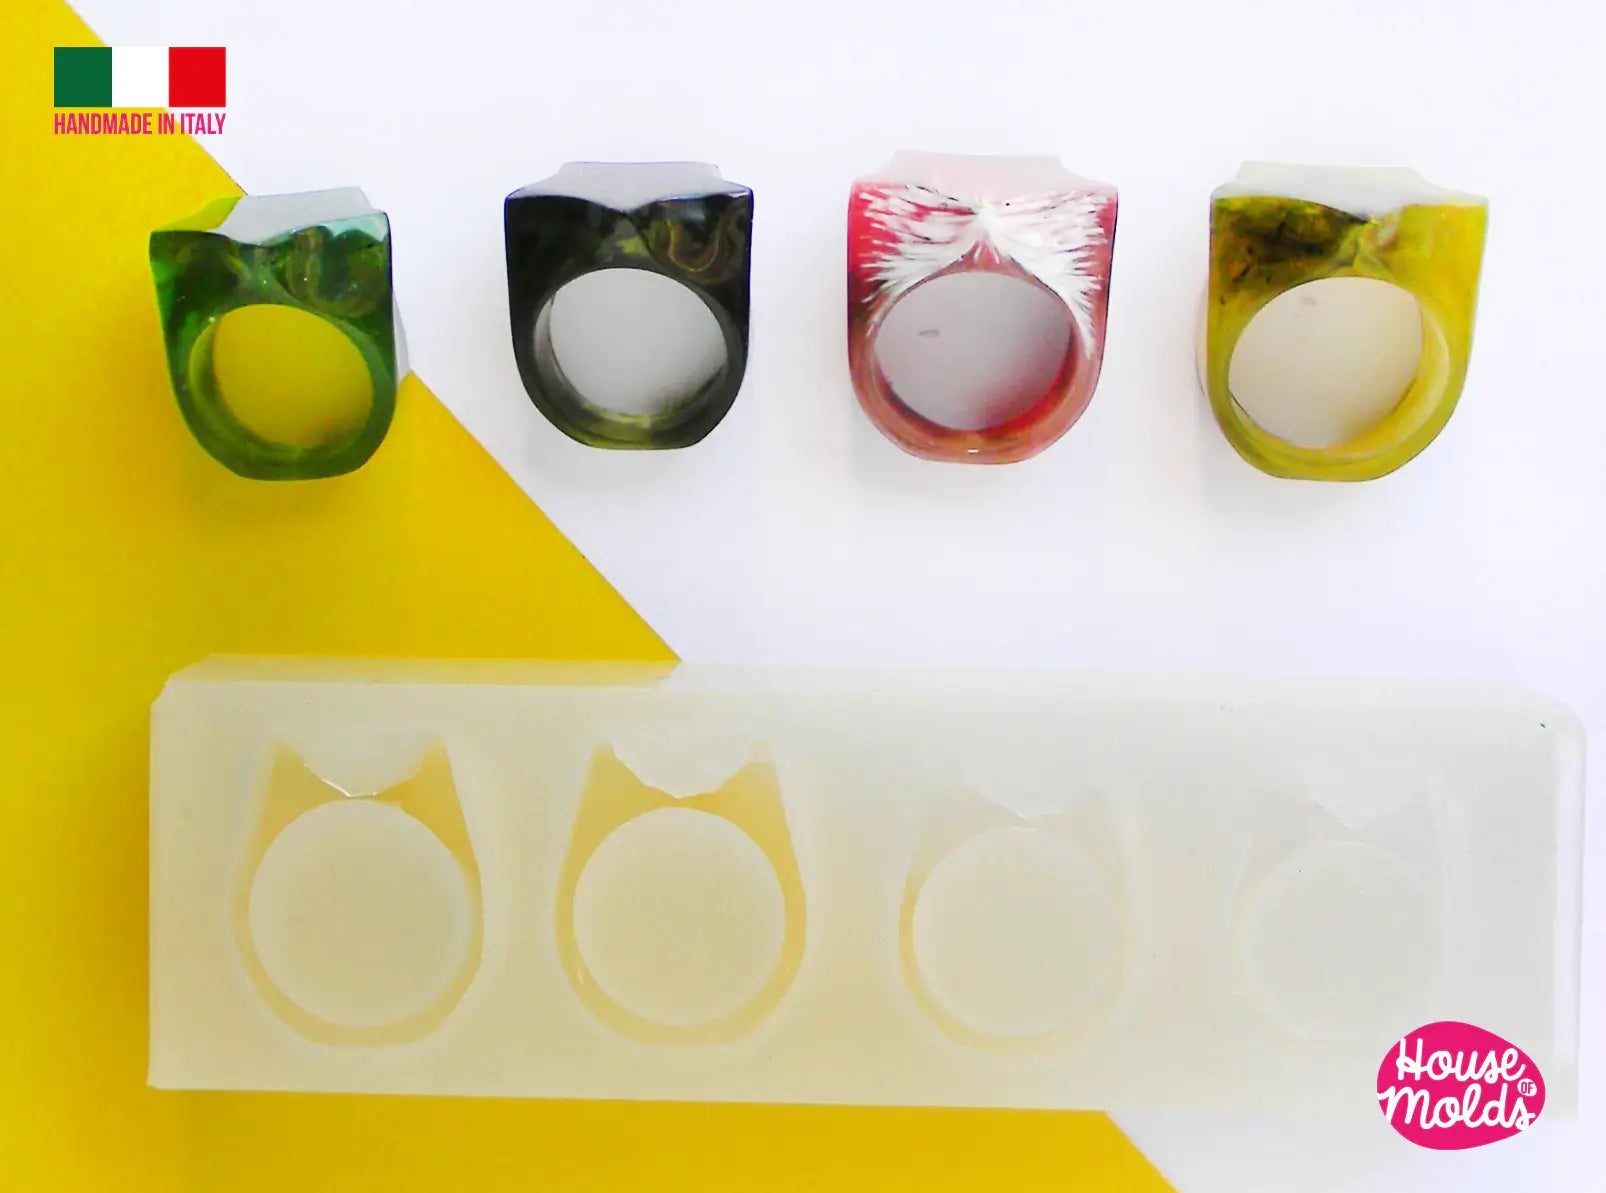 Plastic VS Silicone Molds: What's the Difference?